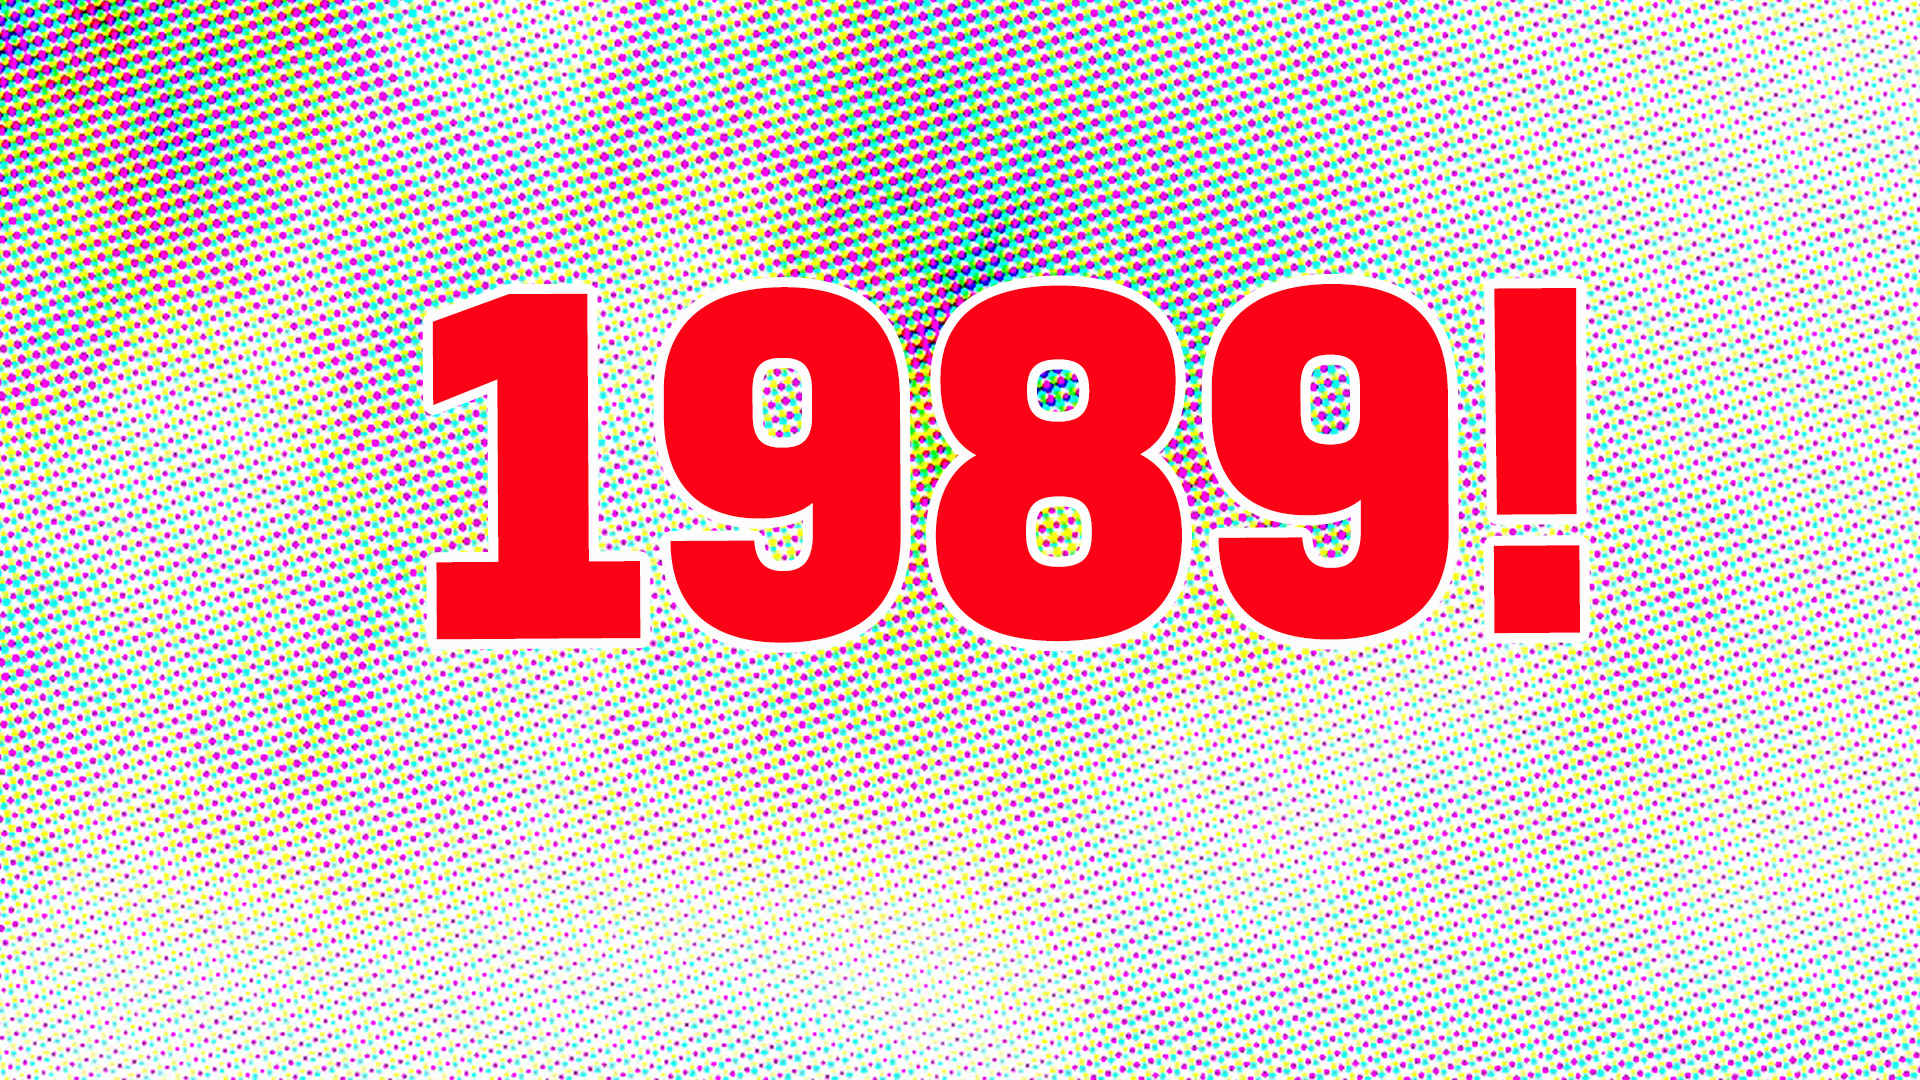 You got 1989! Just like this album, you're vintage, retro and you love having fun! You're not afraid to draw inspiration from the past, and you always know how to Shake it Off!